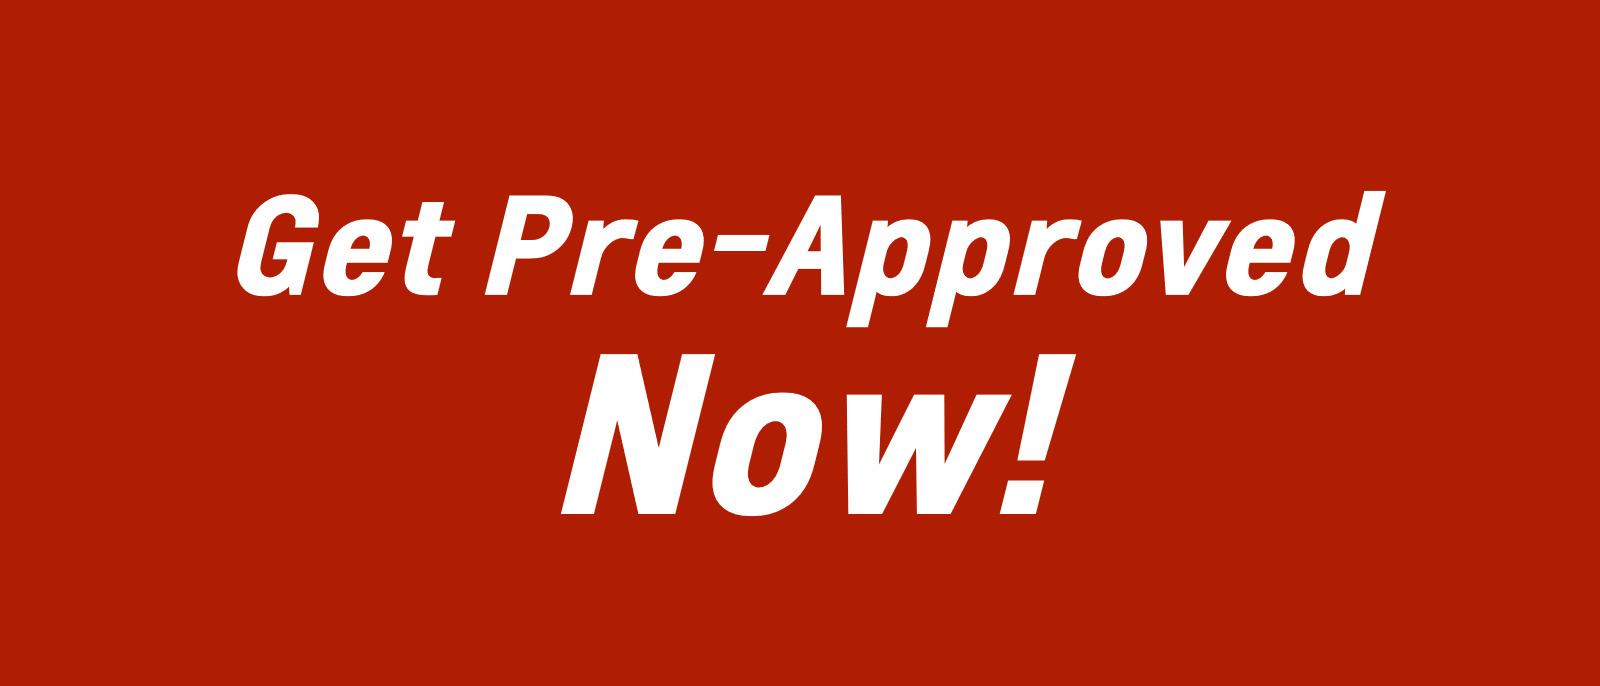 Get Pre-Approved Now CTA image